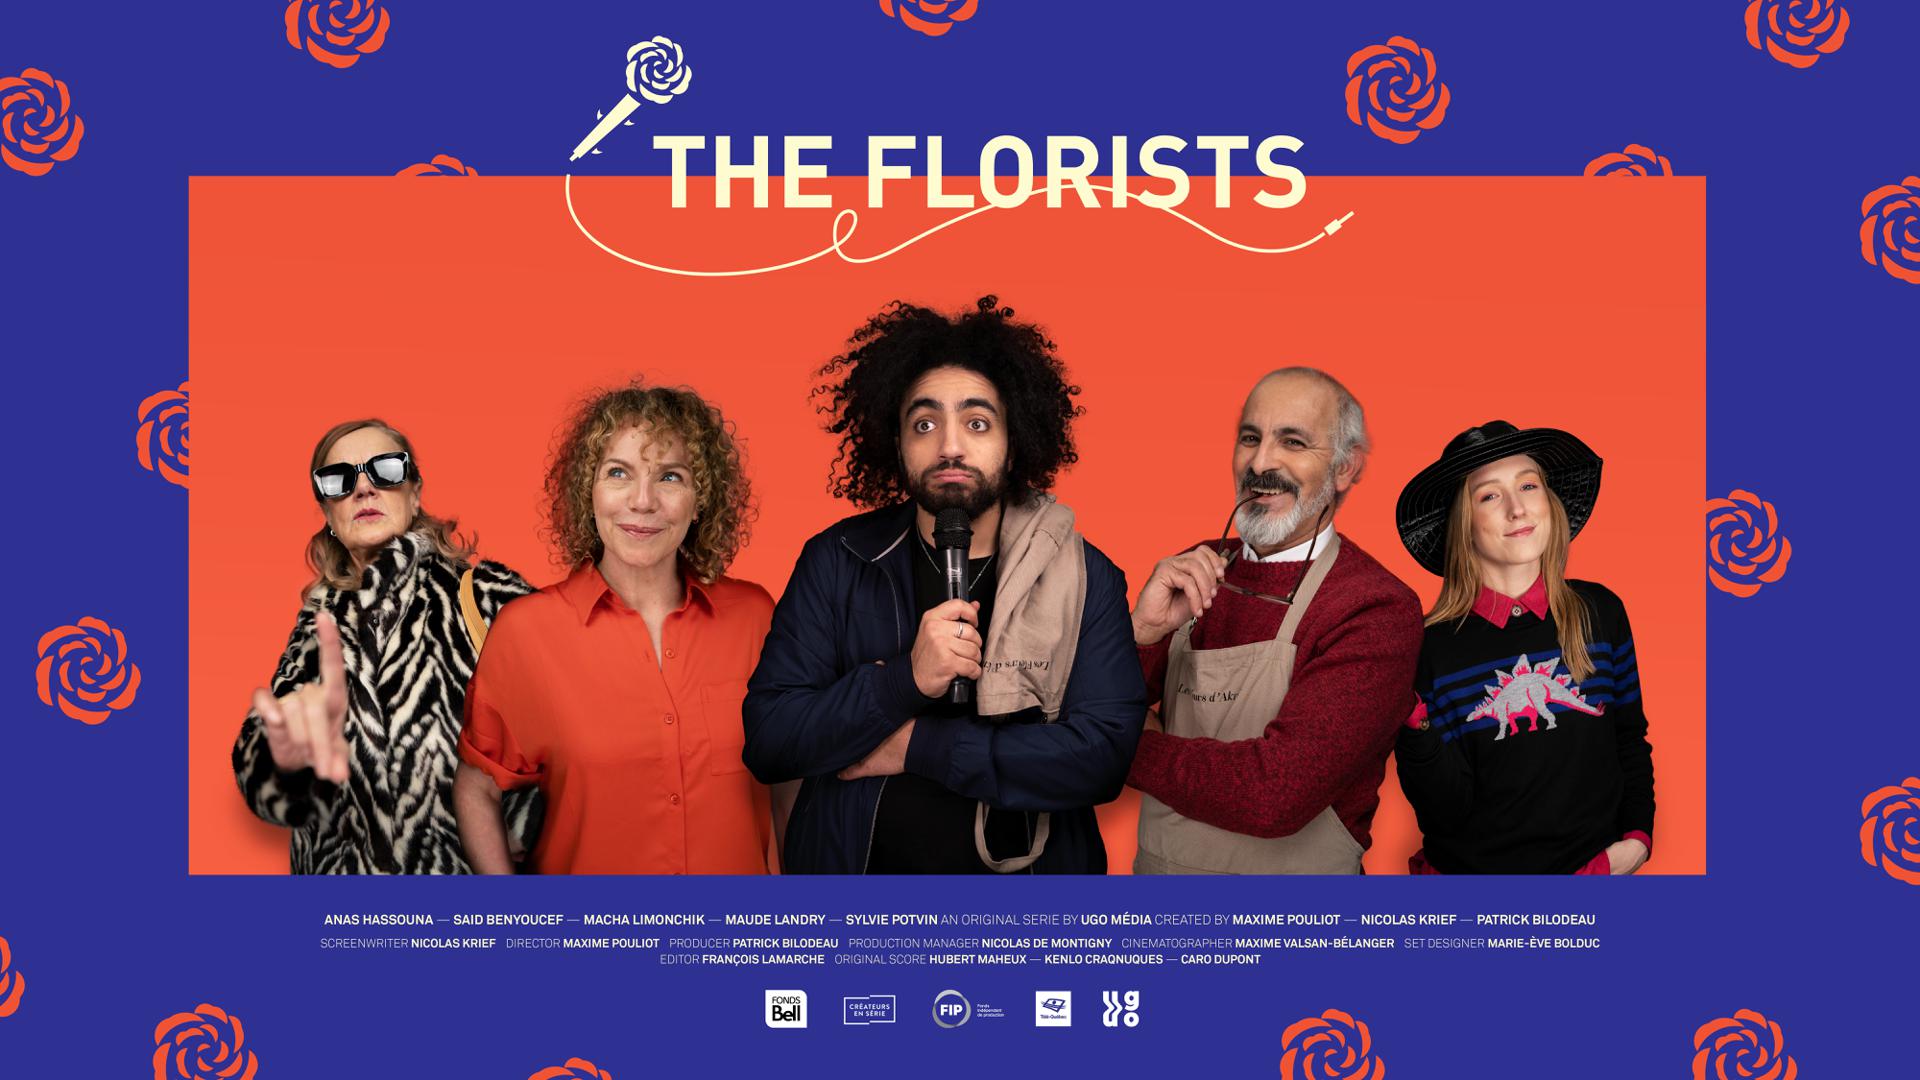 The Florists